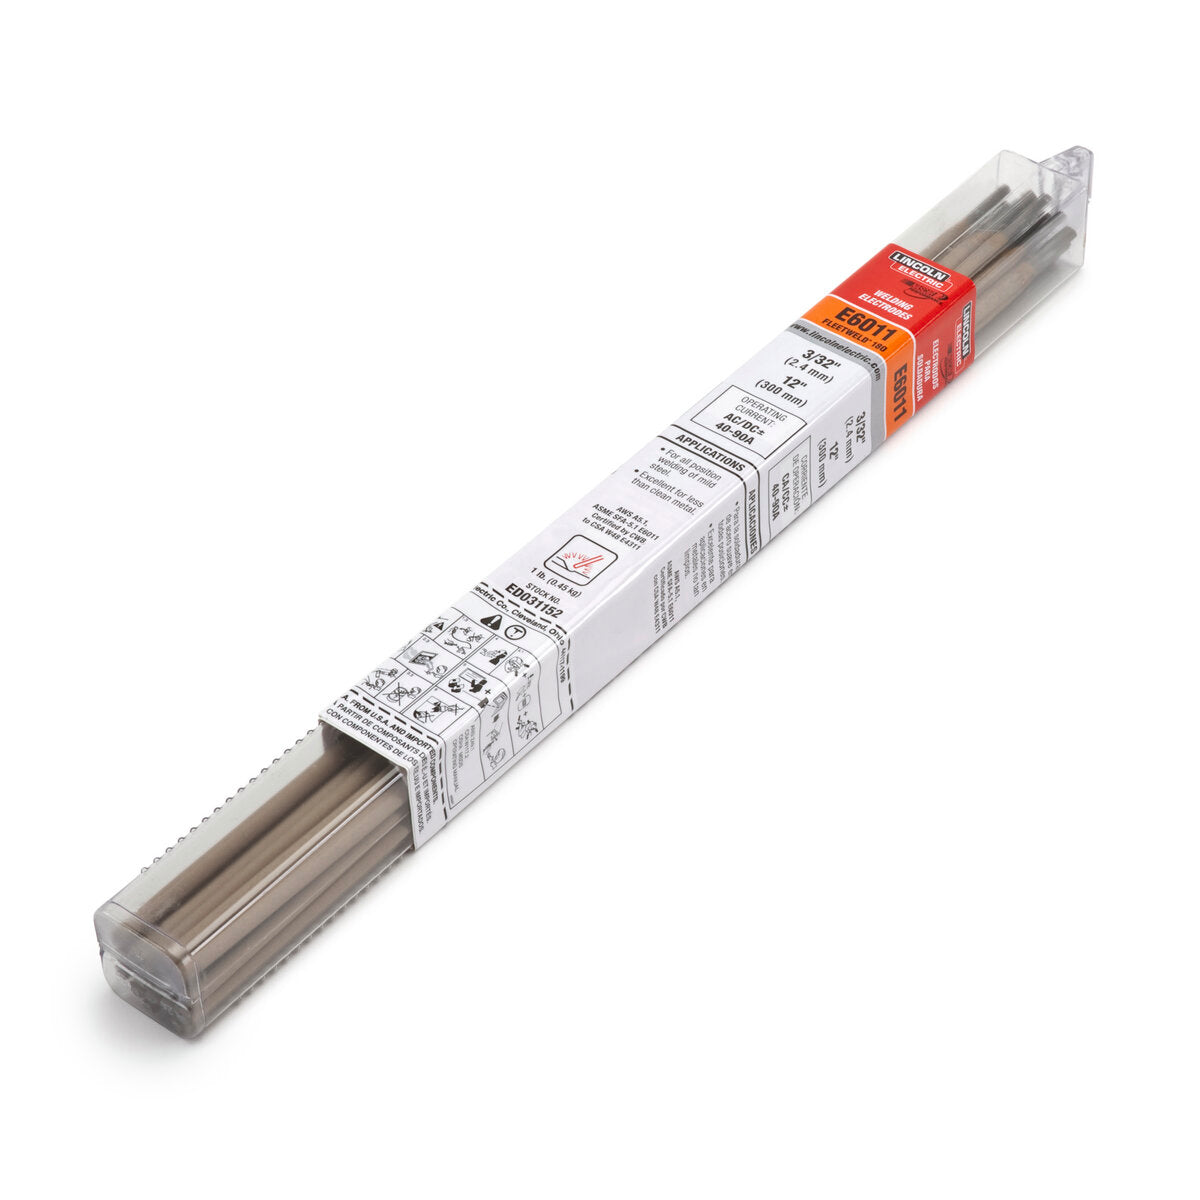 Lincoln Electric - Fleetweld® 180-RSP Stick (SMAW) Electrode, 3/32x12 in, (6) 1 lb Tube - ED033494